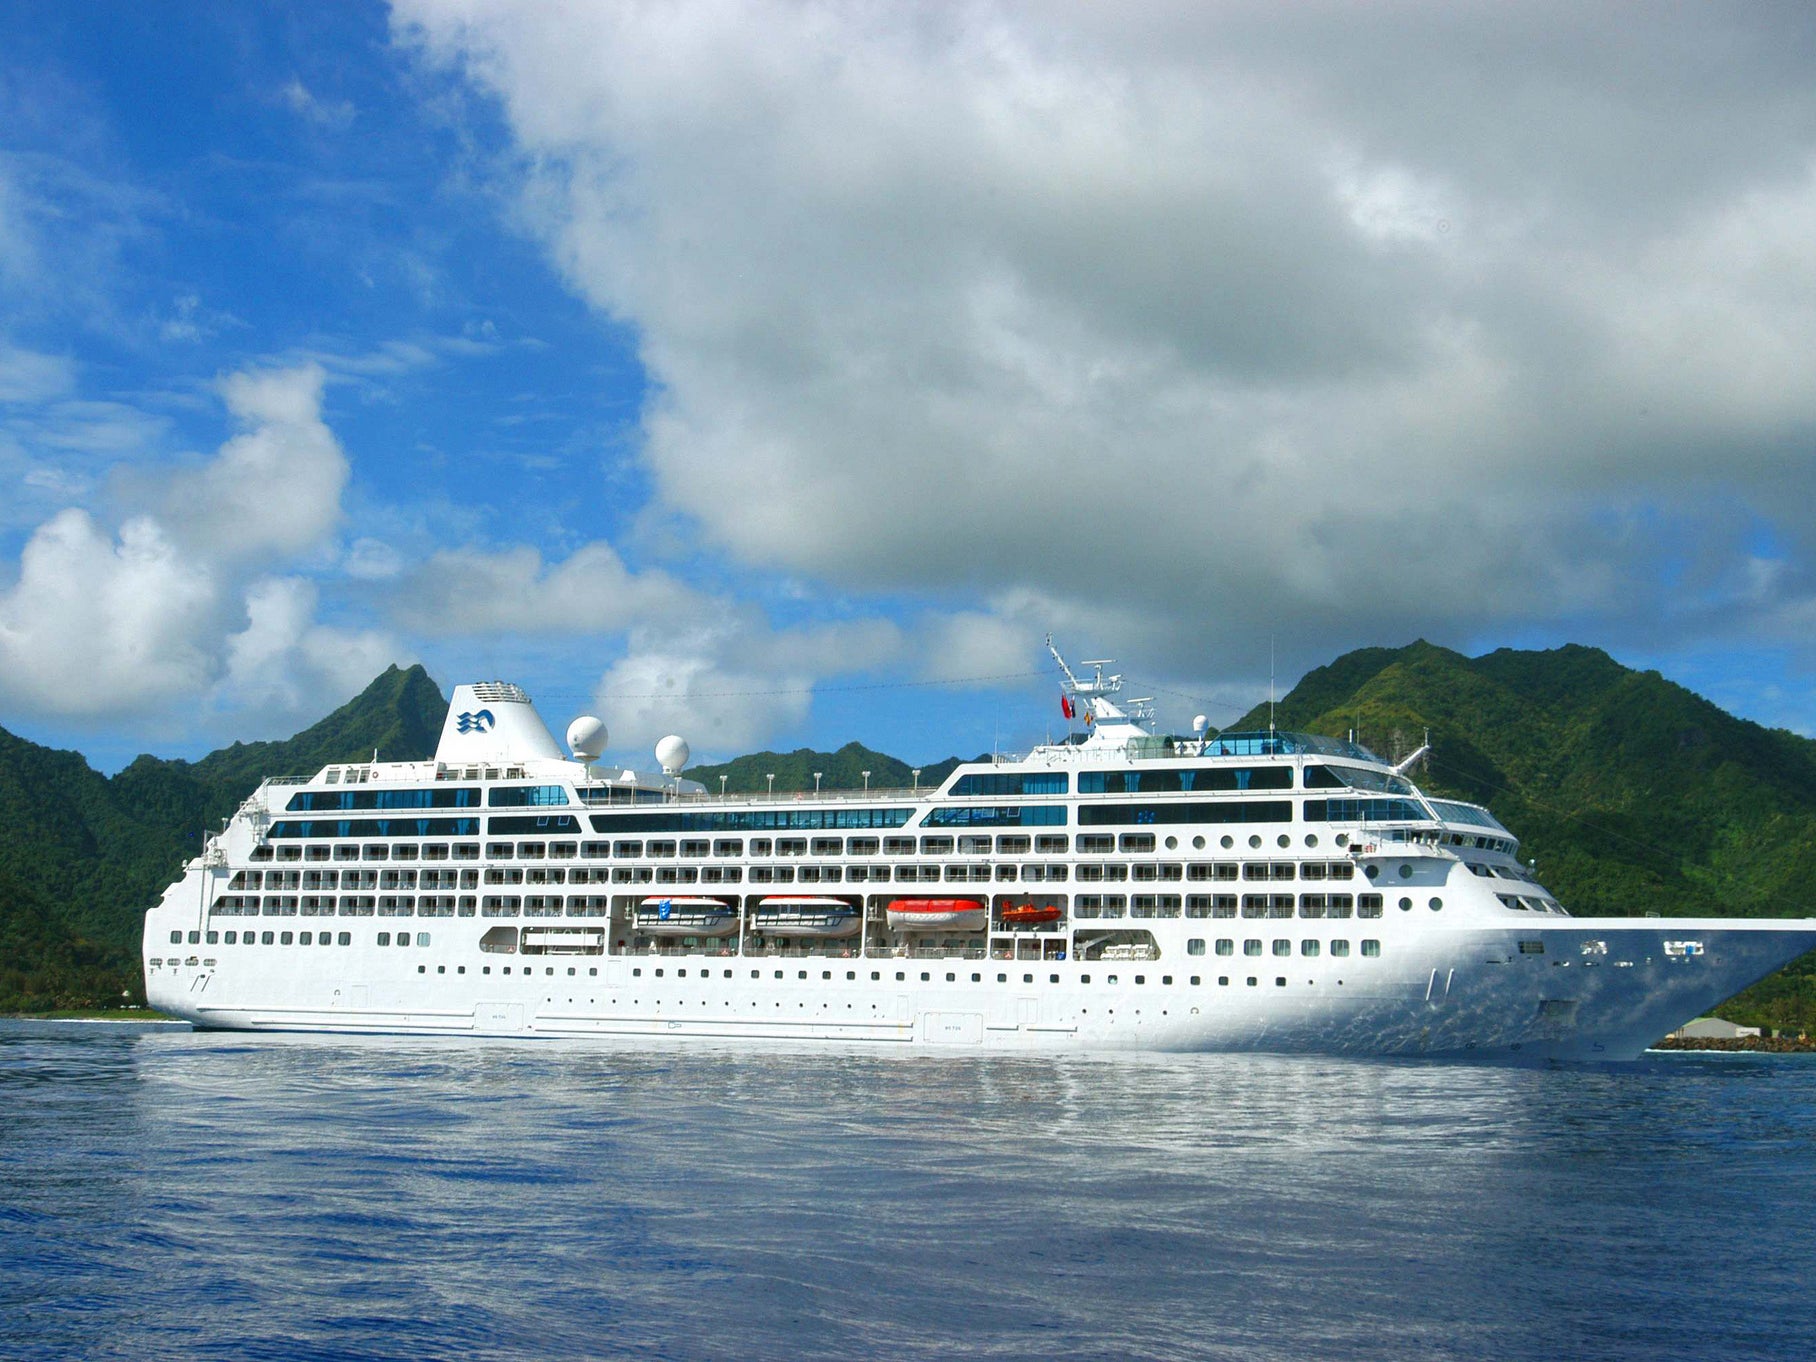 The Pacific Princess during an earlier cruise